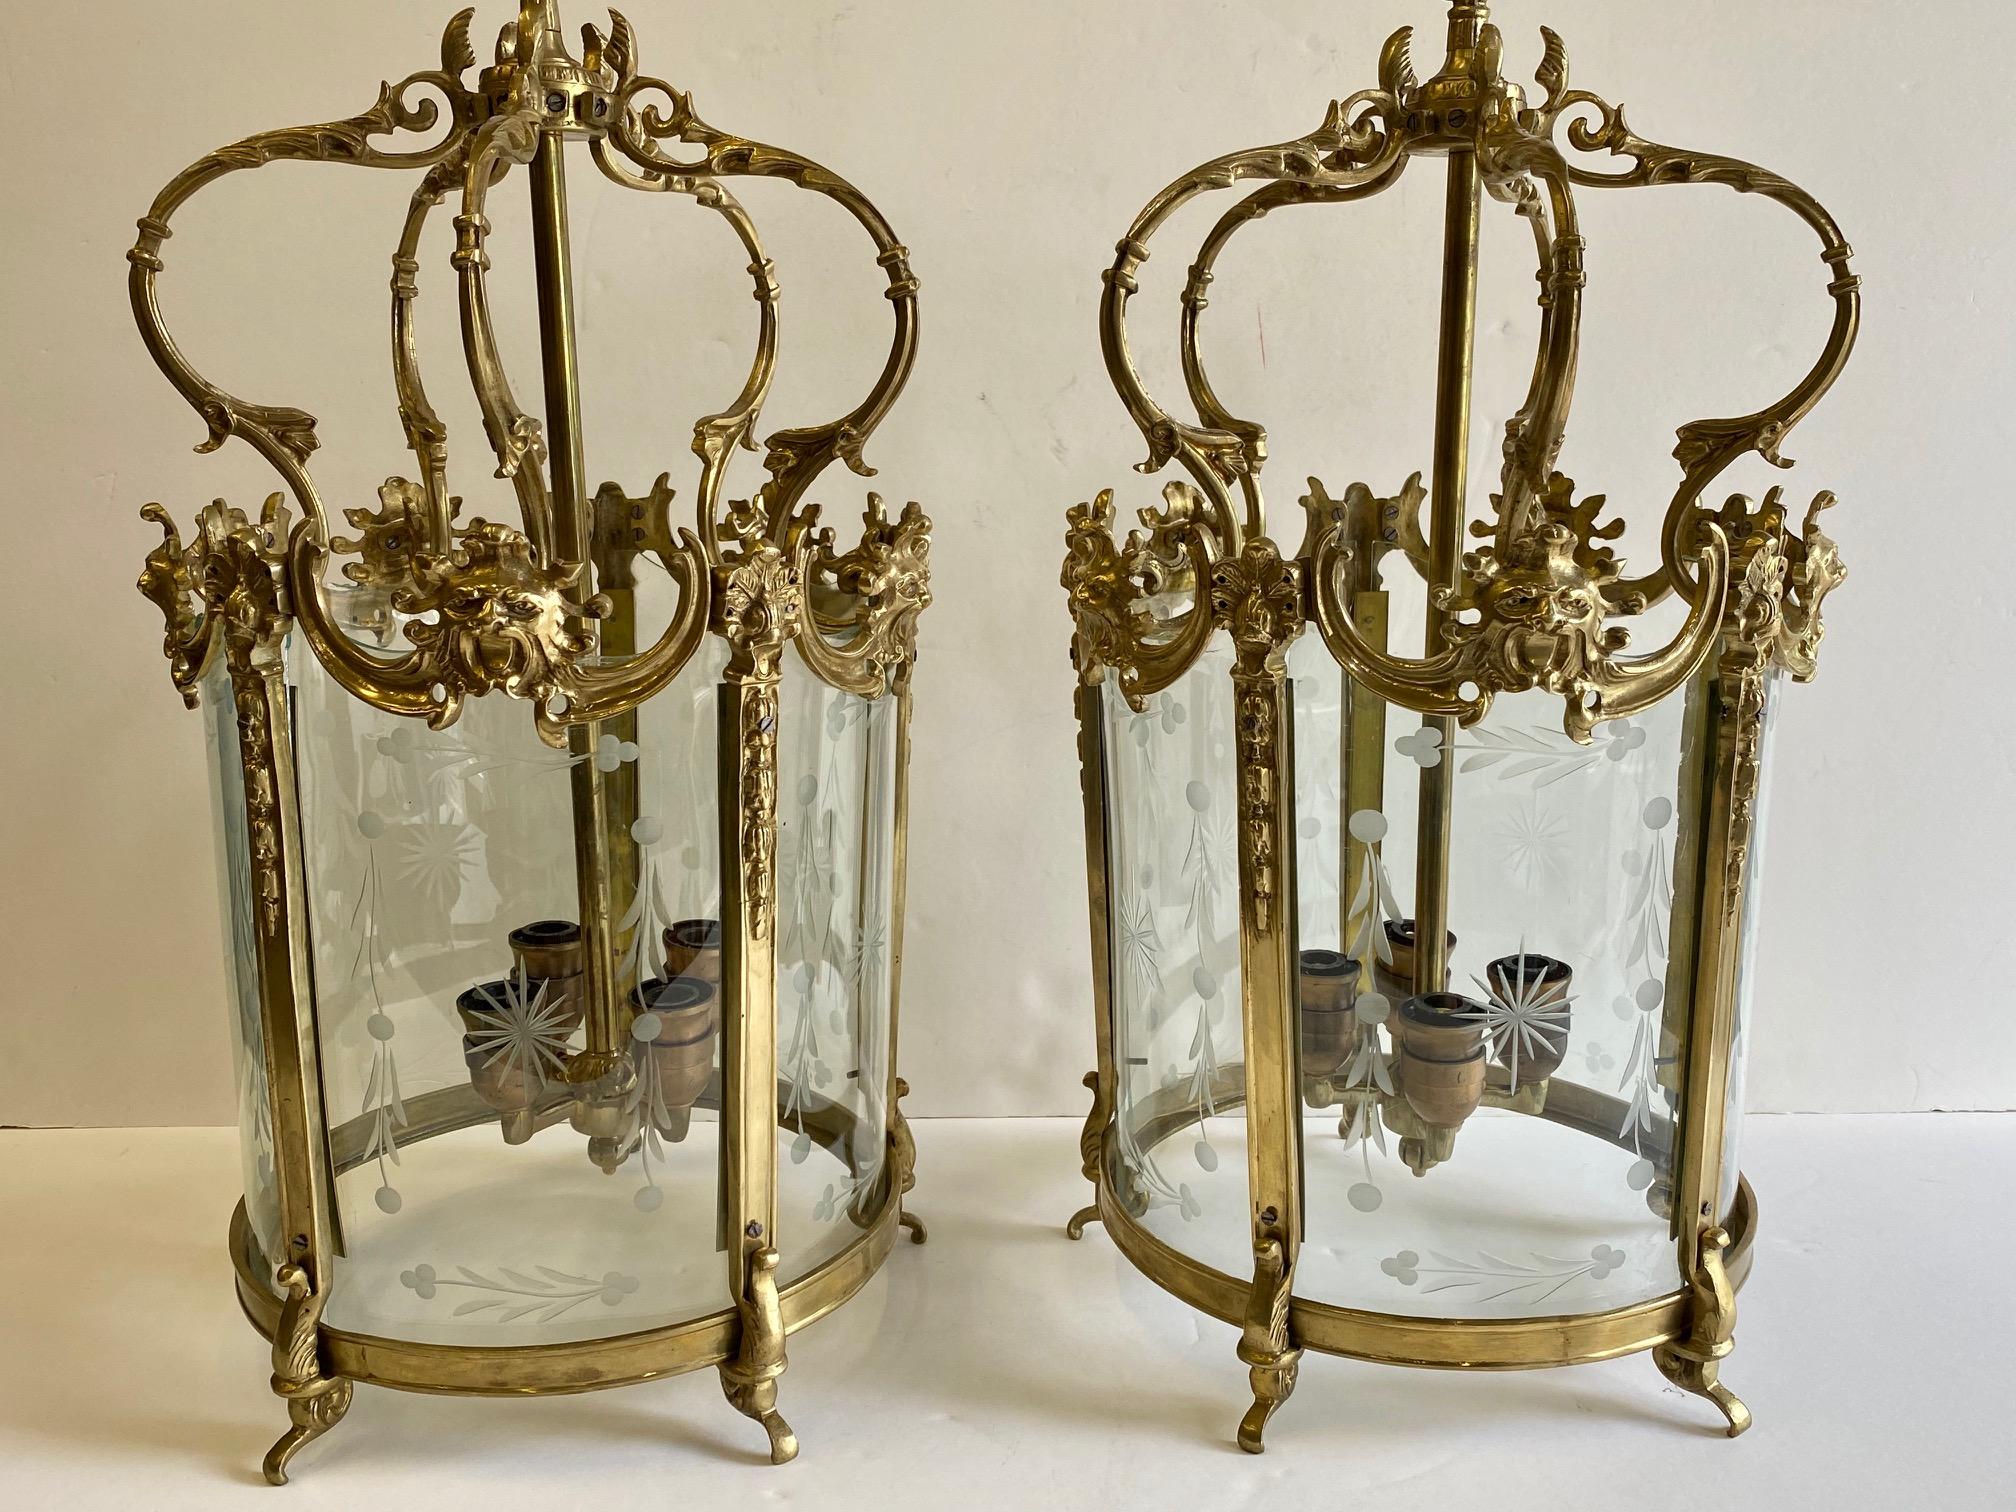 Fancy pair of solid cast brass Italian lanterns having etched glass and four sockets in each.